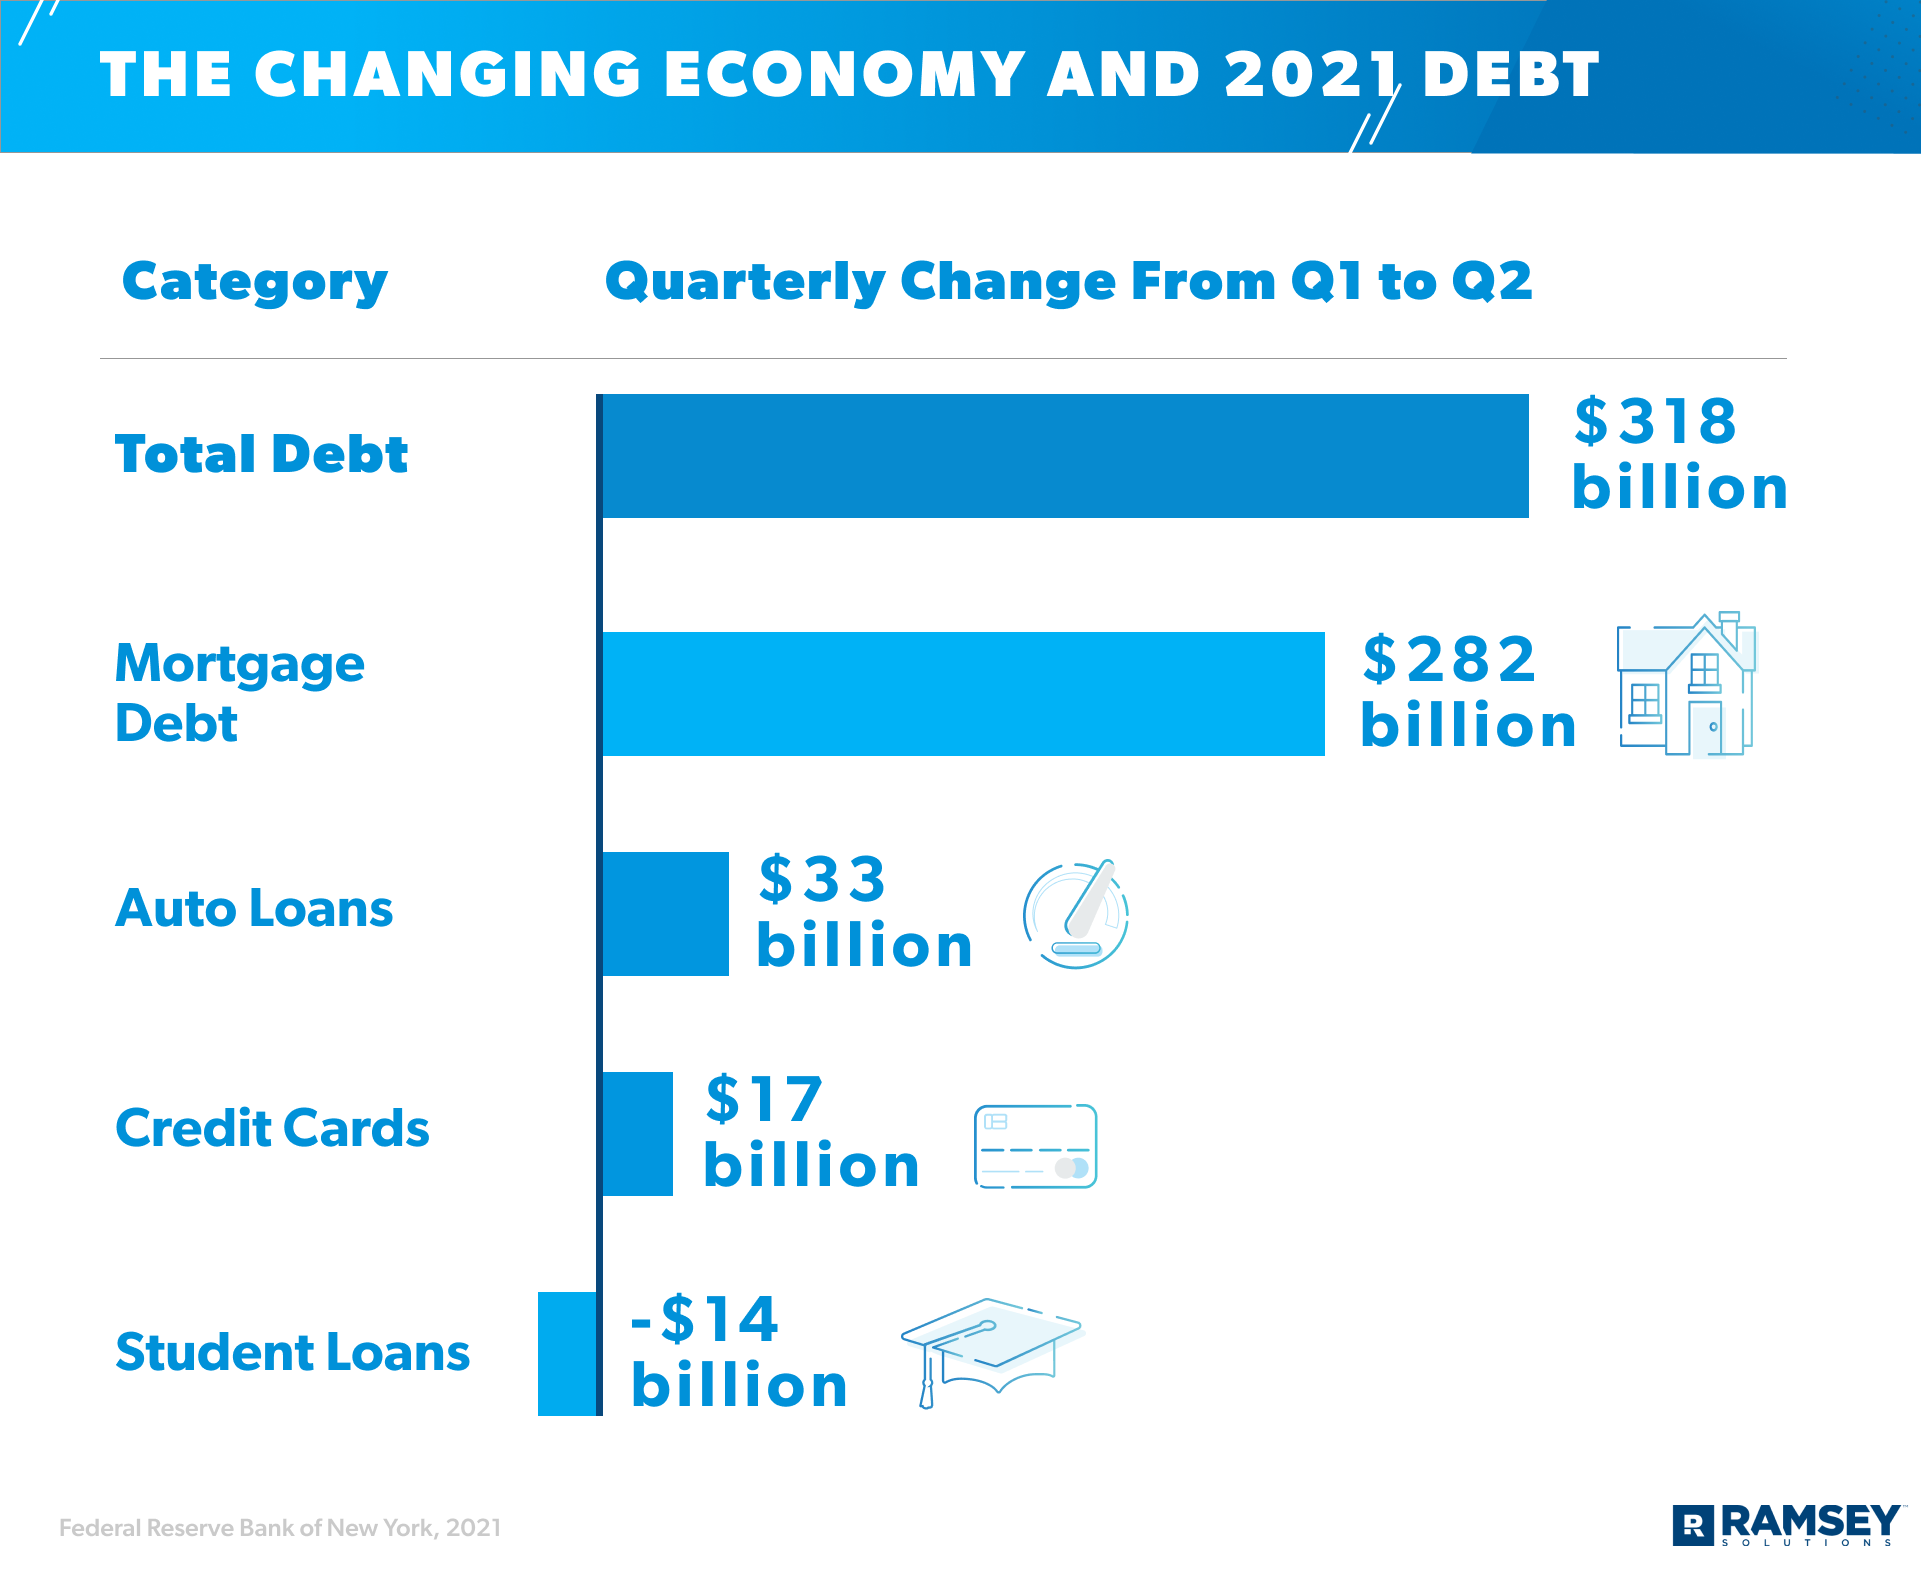 The Changing Economy and 2021 Debt